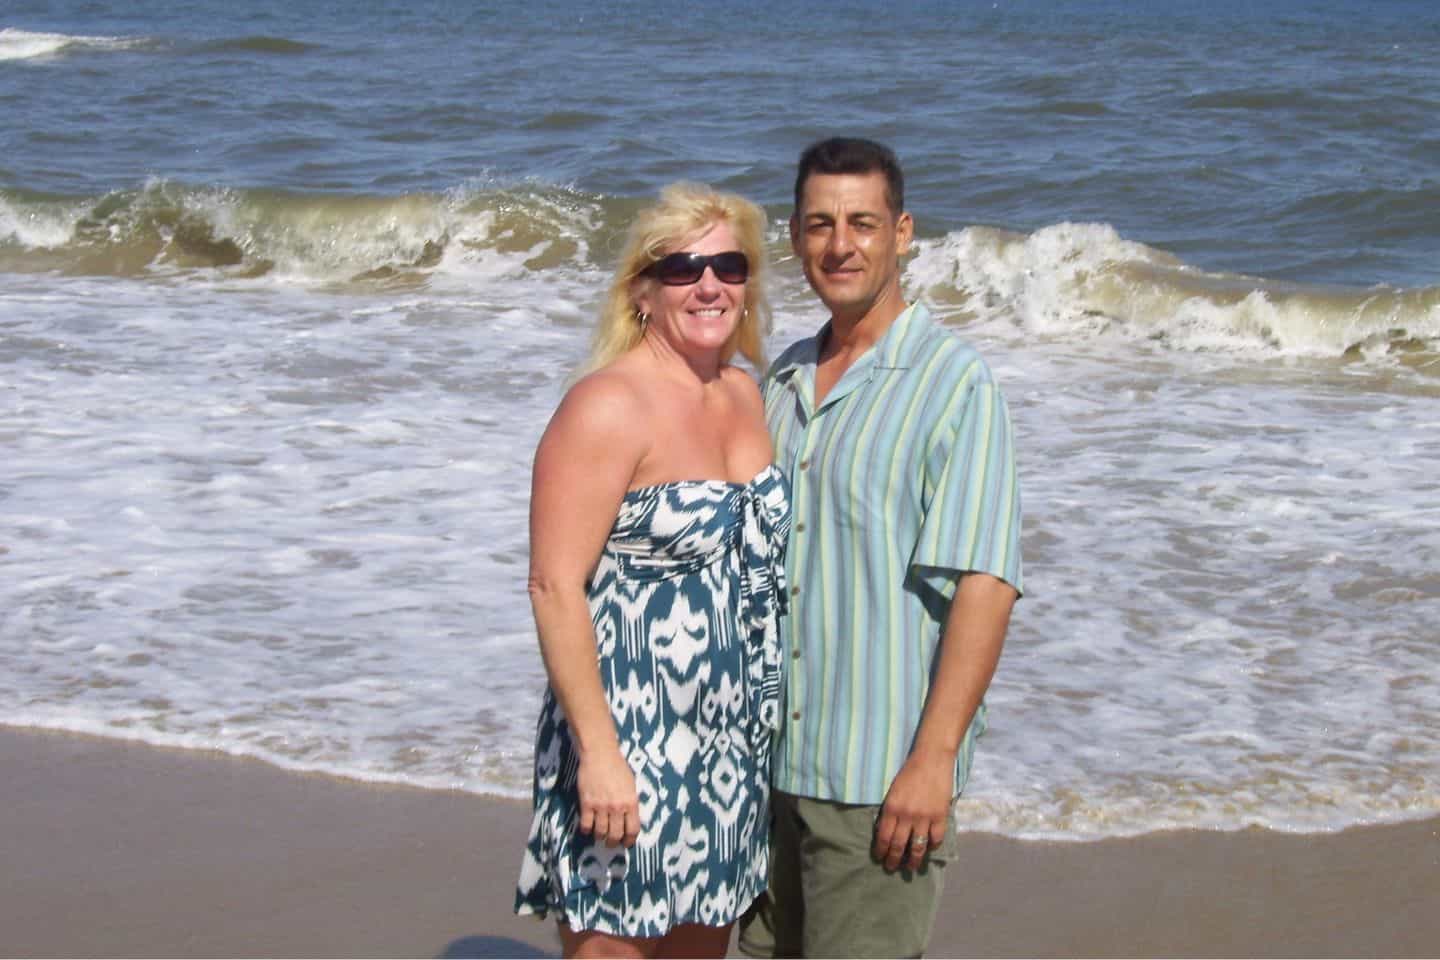 Colleen and Ron standing on the beach with the ocean behind them